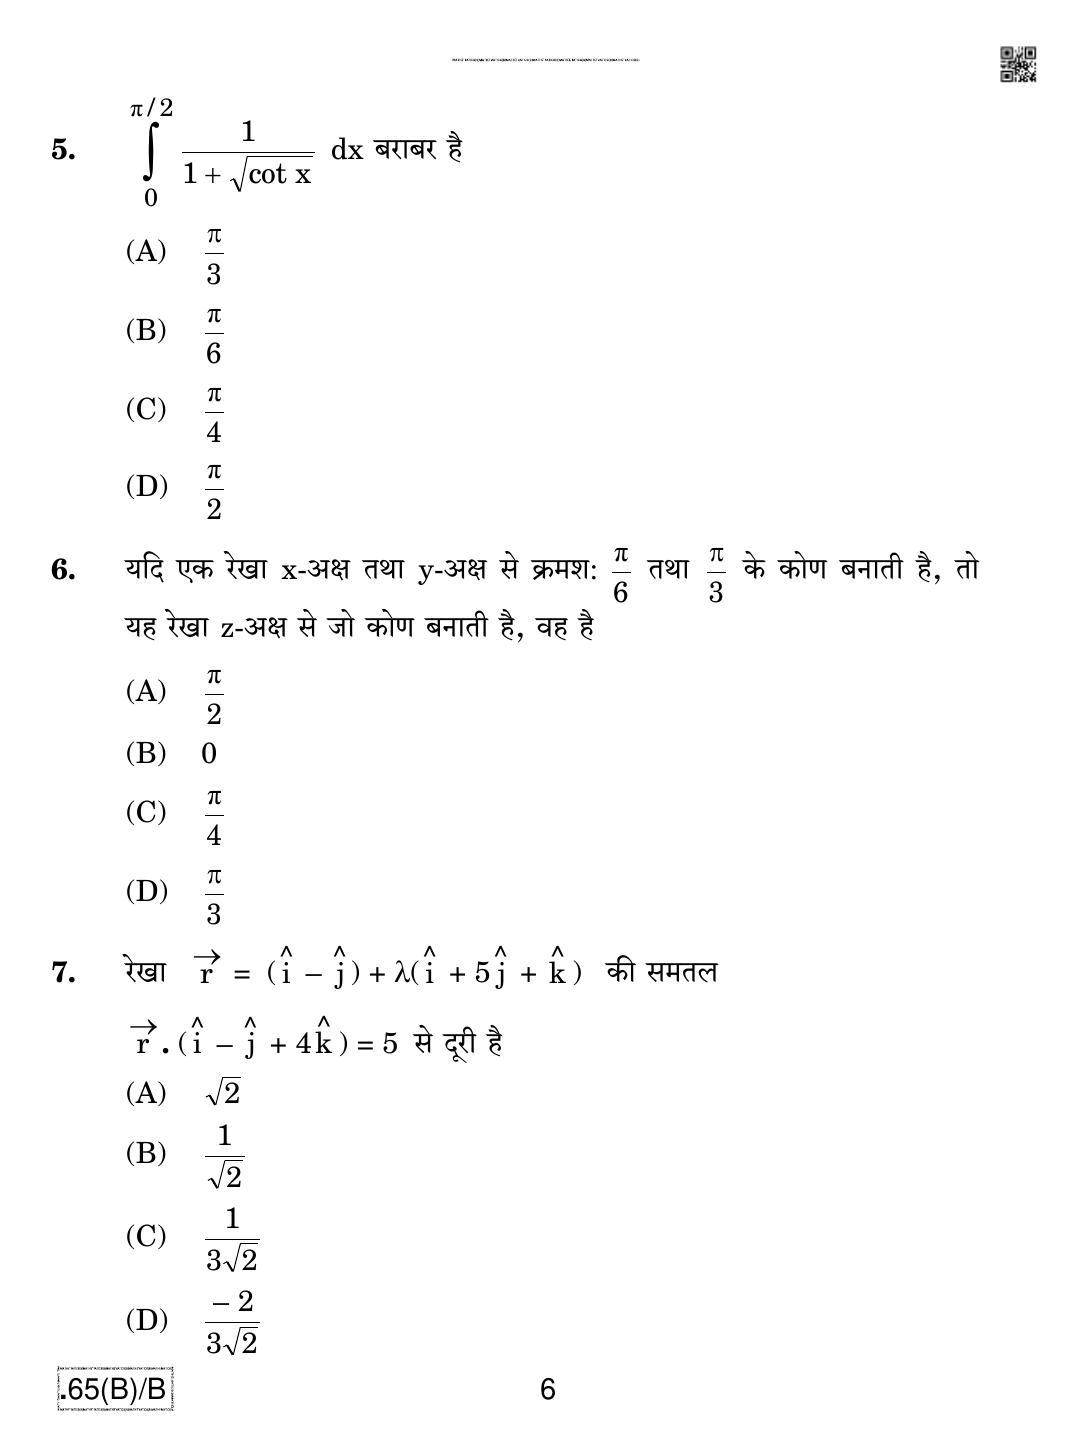 CBSE Class 12 65(B)-C - Maths For Blind Candidates 2020 Compartment Question Paper - Page 6